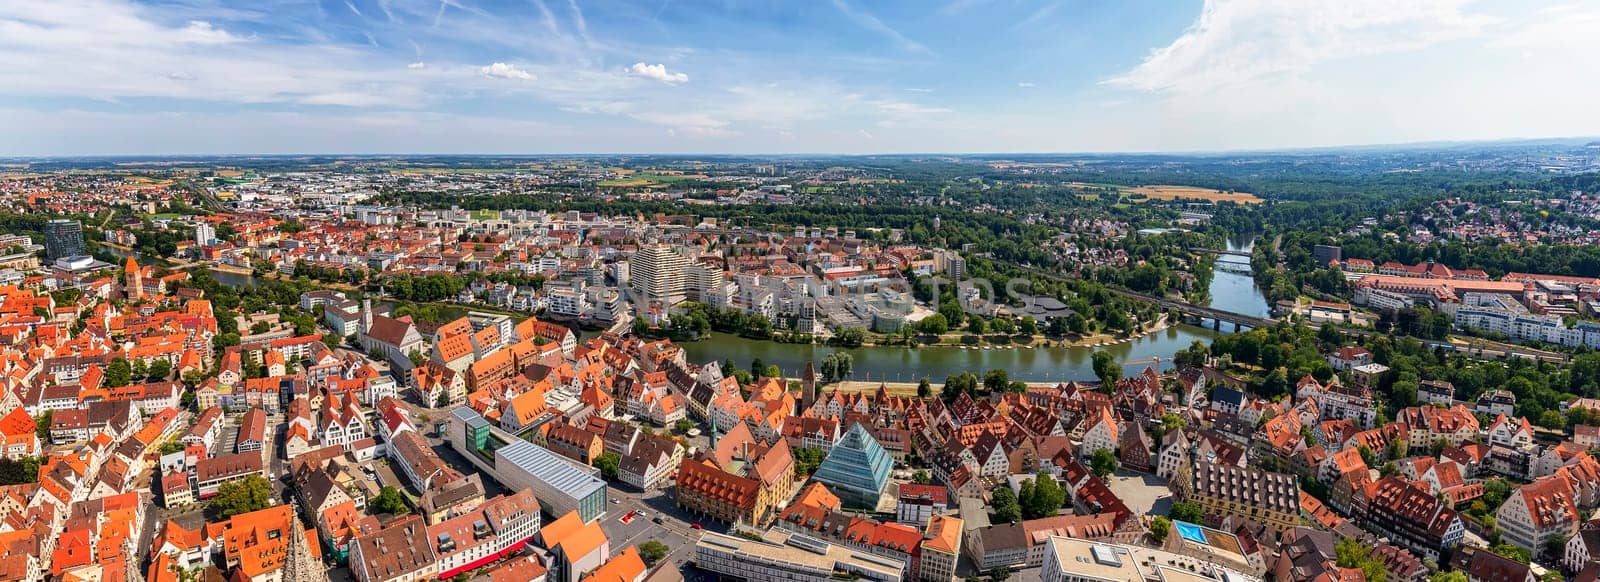 Amazing panoramic view of the city Ulm and river Danube, Germany. by EdVal